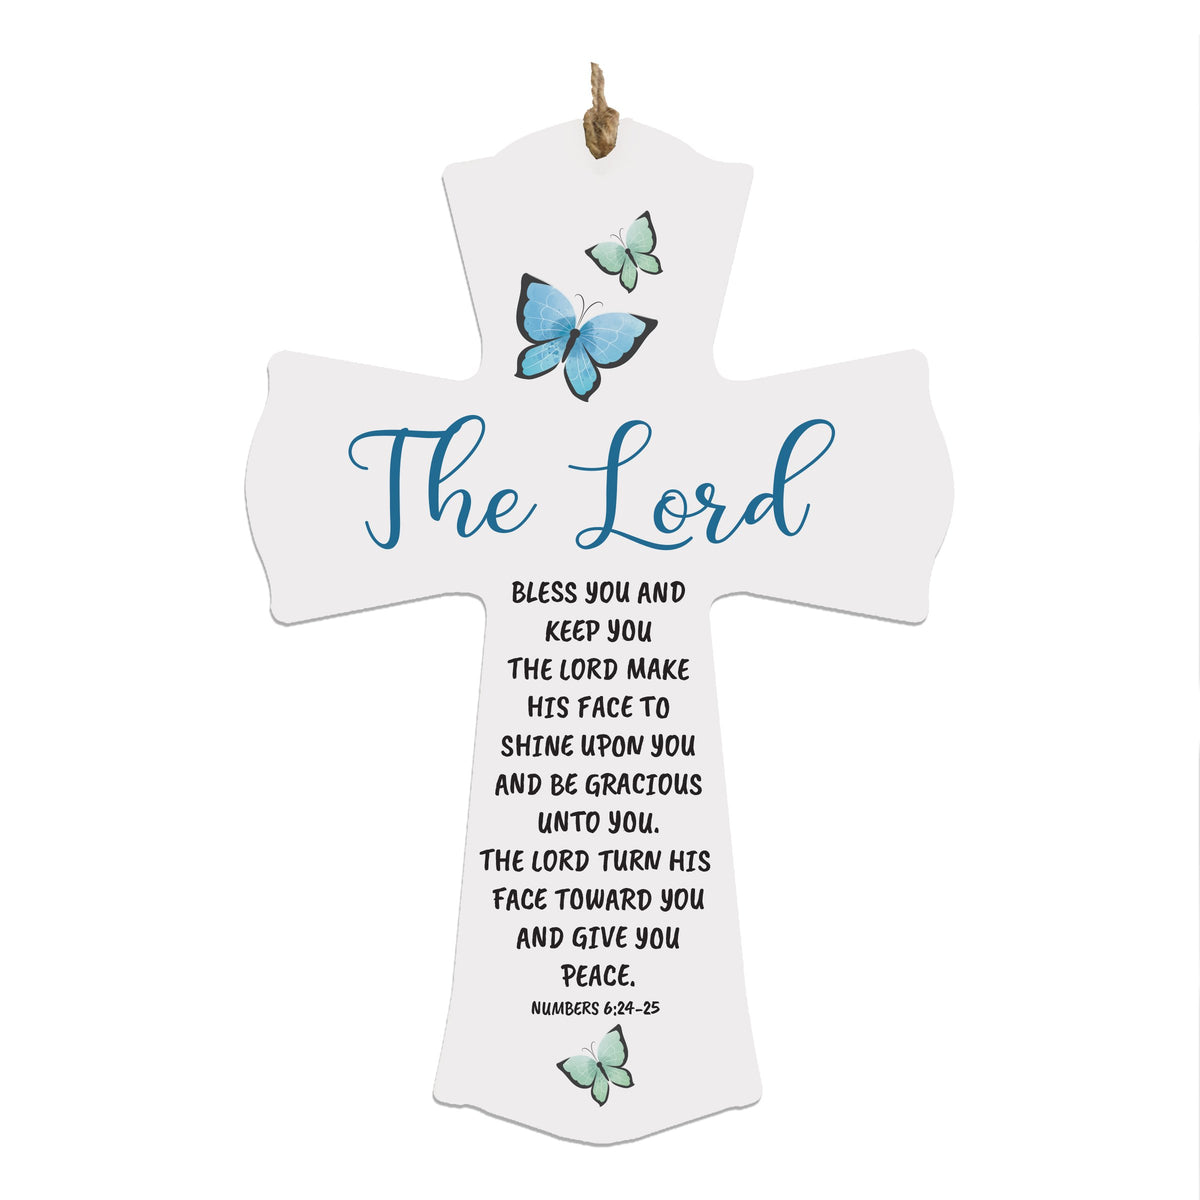 LifeSong Milestones Printed Baptism Gift for Godson, Godchild - Christening Printed Hanging Wall Cross from Godparents for First Holy Communion 8.5” x 11”